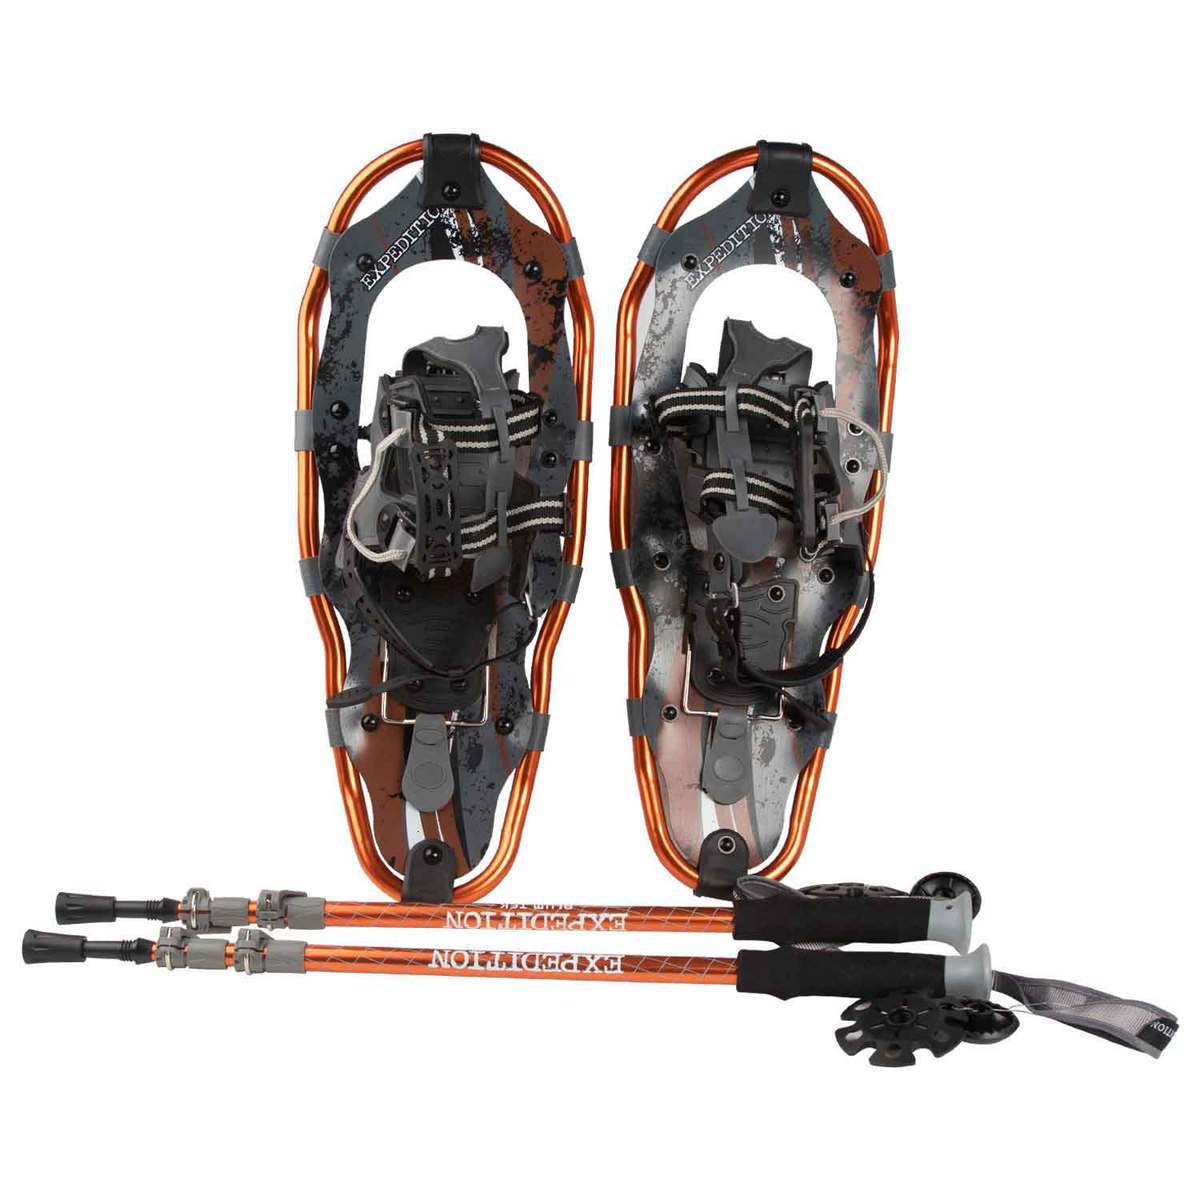 Expedition Truger Snowshoe Kit with Bag & Poles-New in Packaging 8"x25"